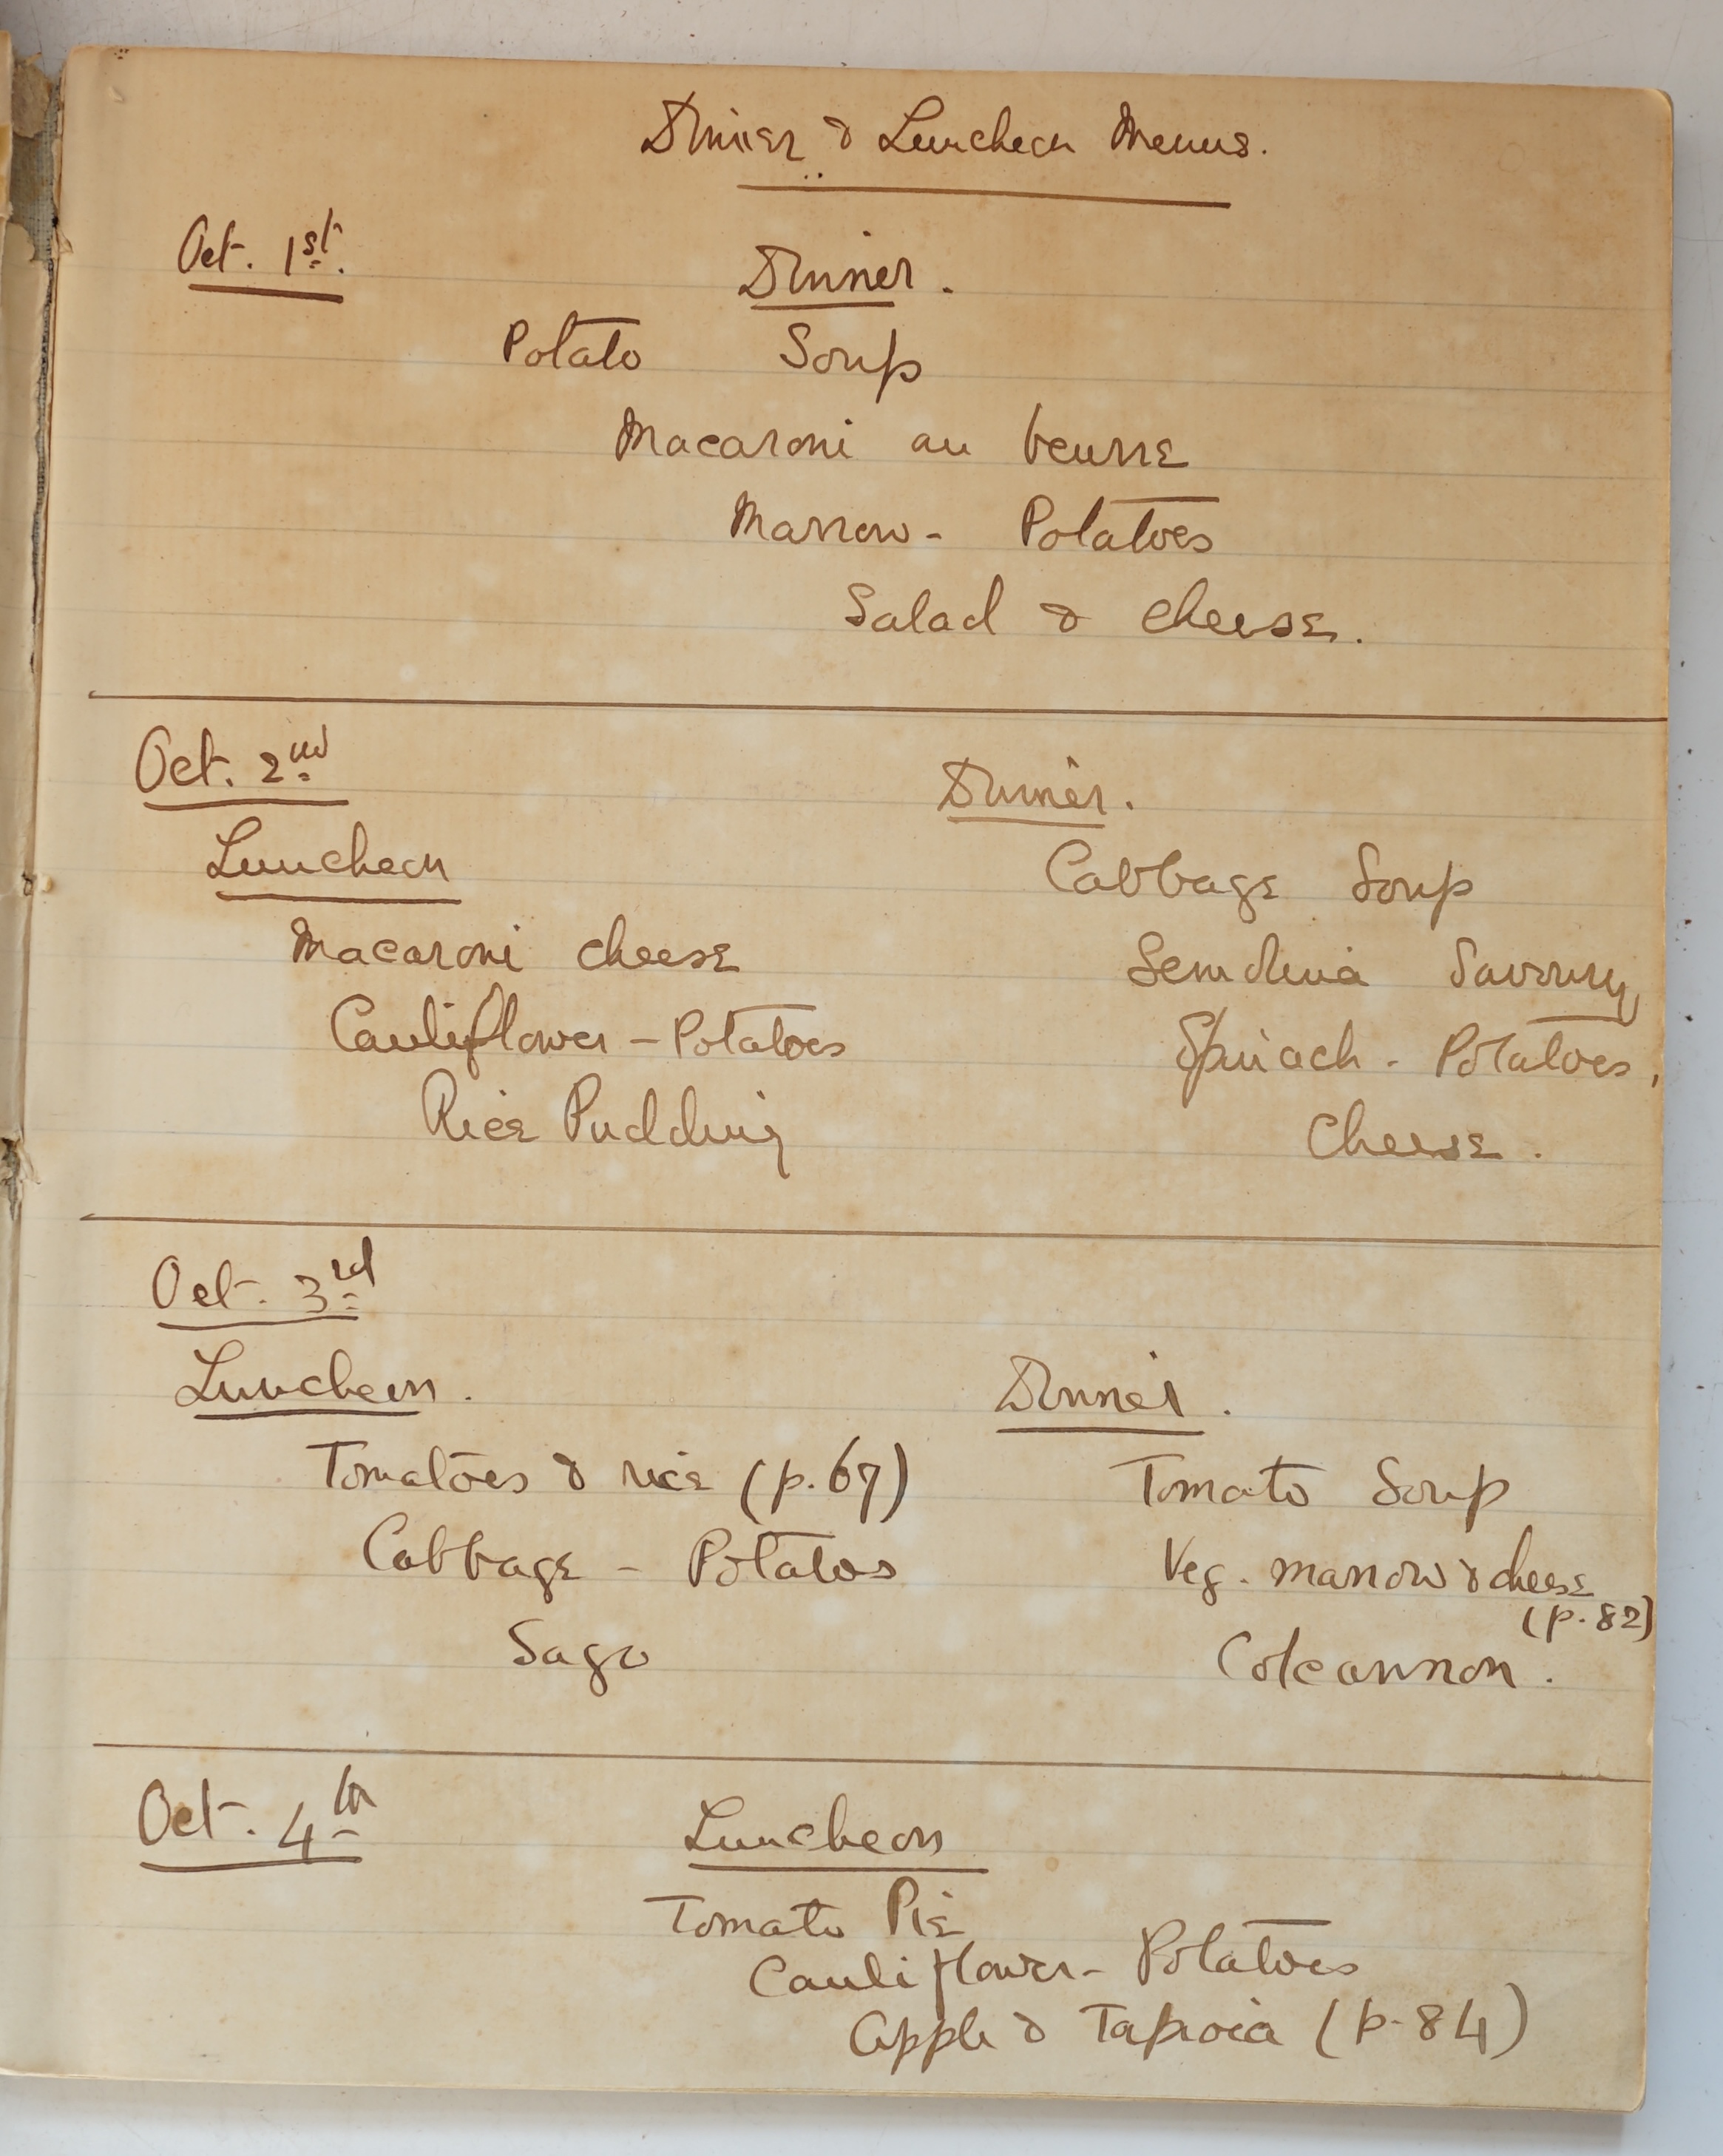 An Edward VII booklet, recording Dinner and Lunch Menus from May 1st to October 7th 1907, with the names of several guests, including Emmeline Pankhurst (on four occasions) and Teresa Billington, both members of the Brit